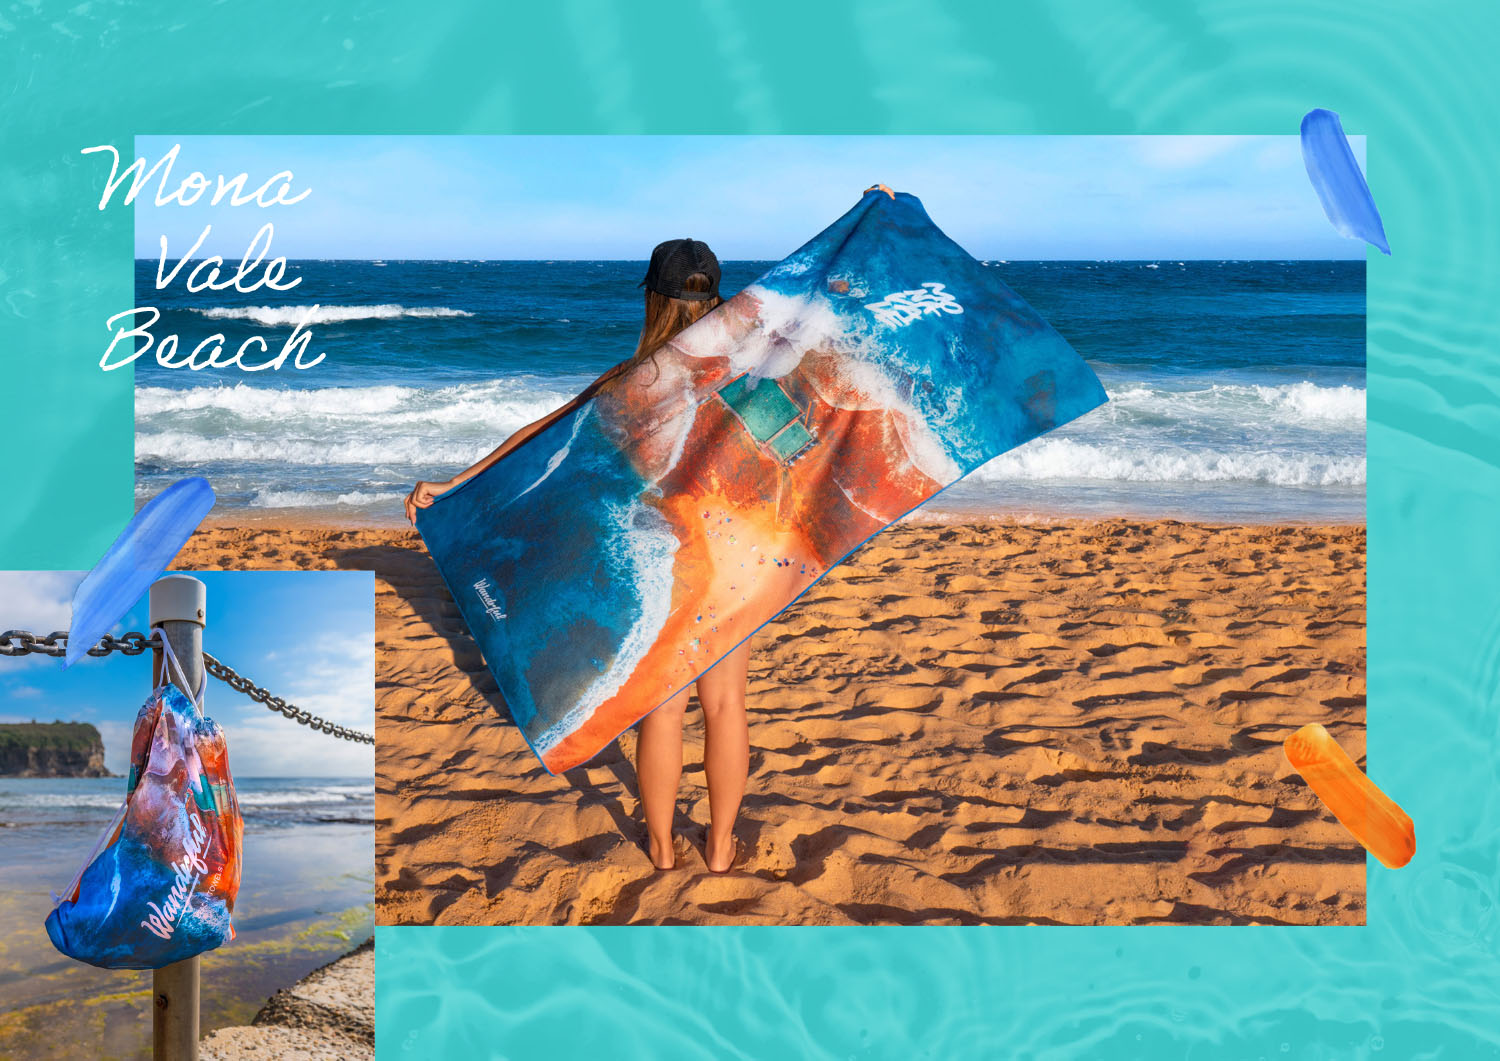 Wandrful sand-free beach towels at Mona Vale Beach. Model using sand-free beach towel.